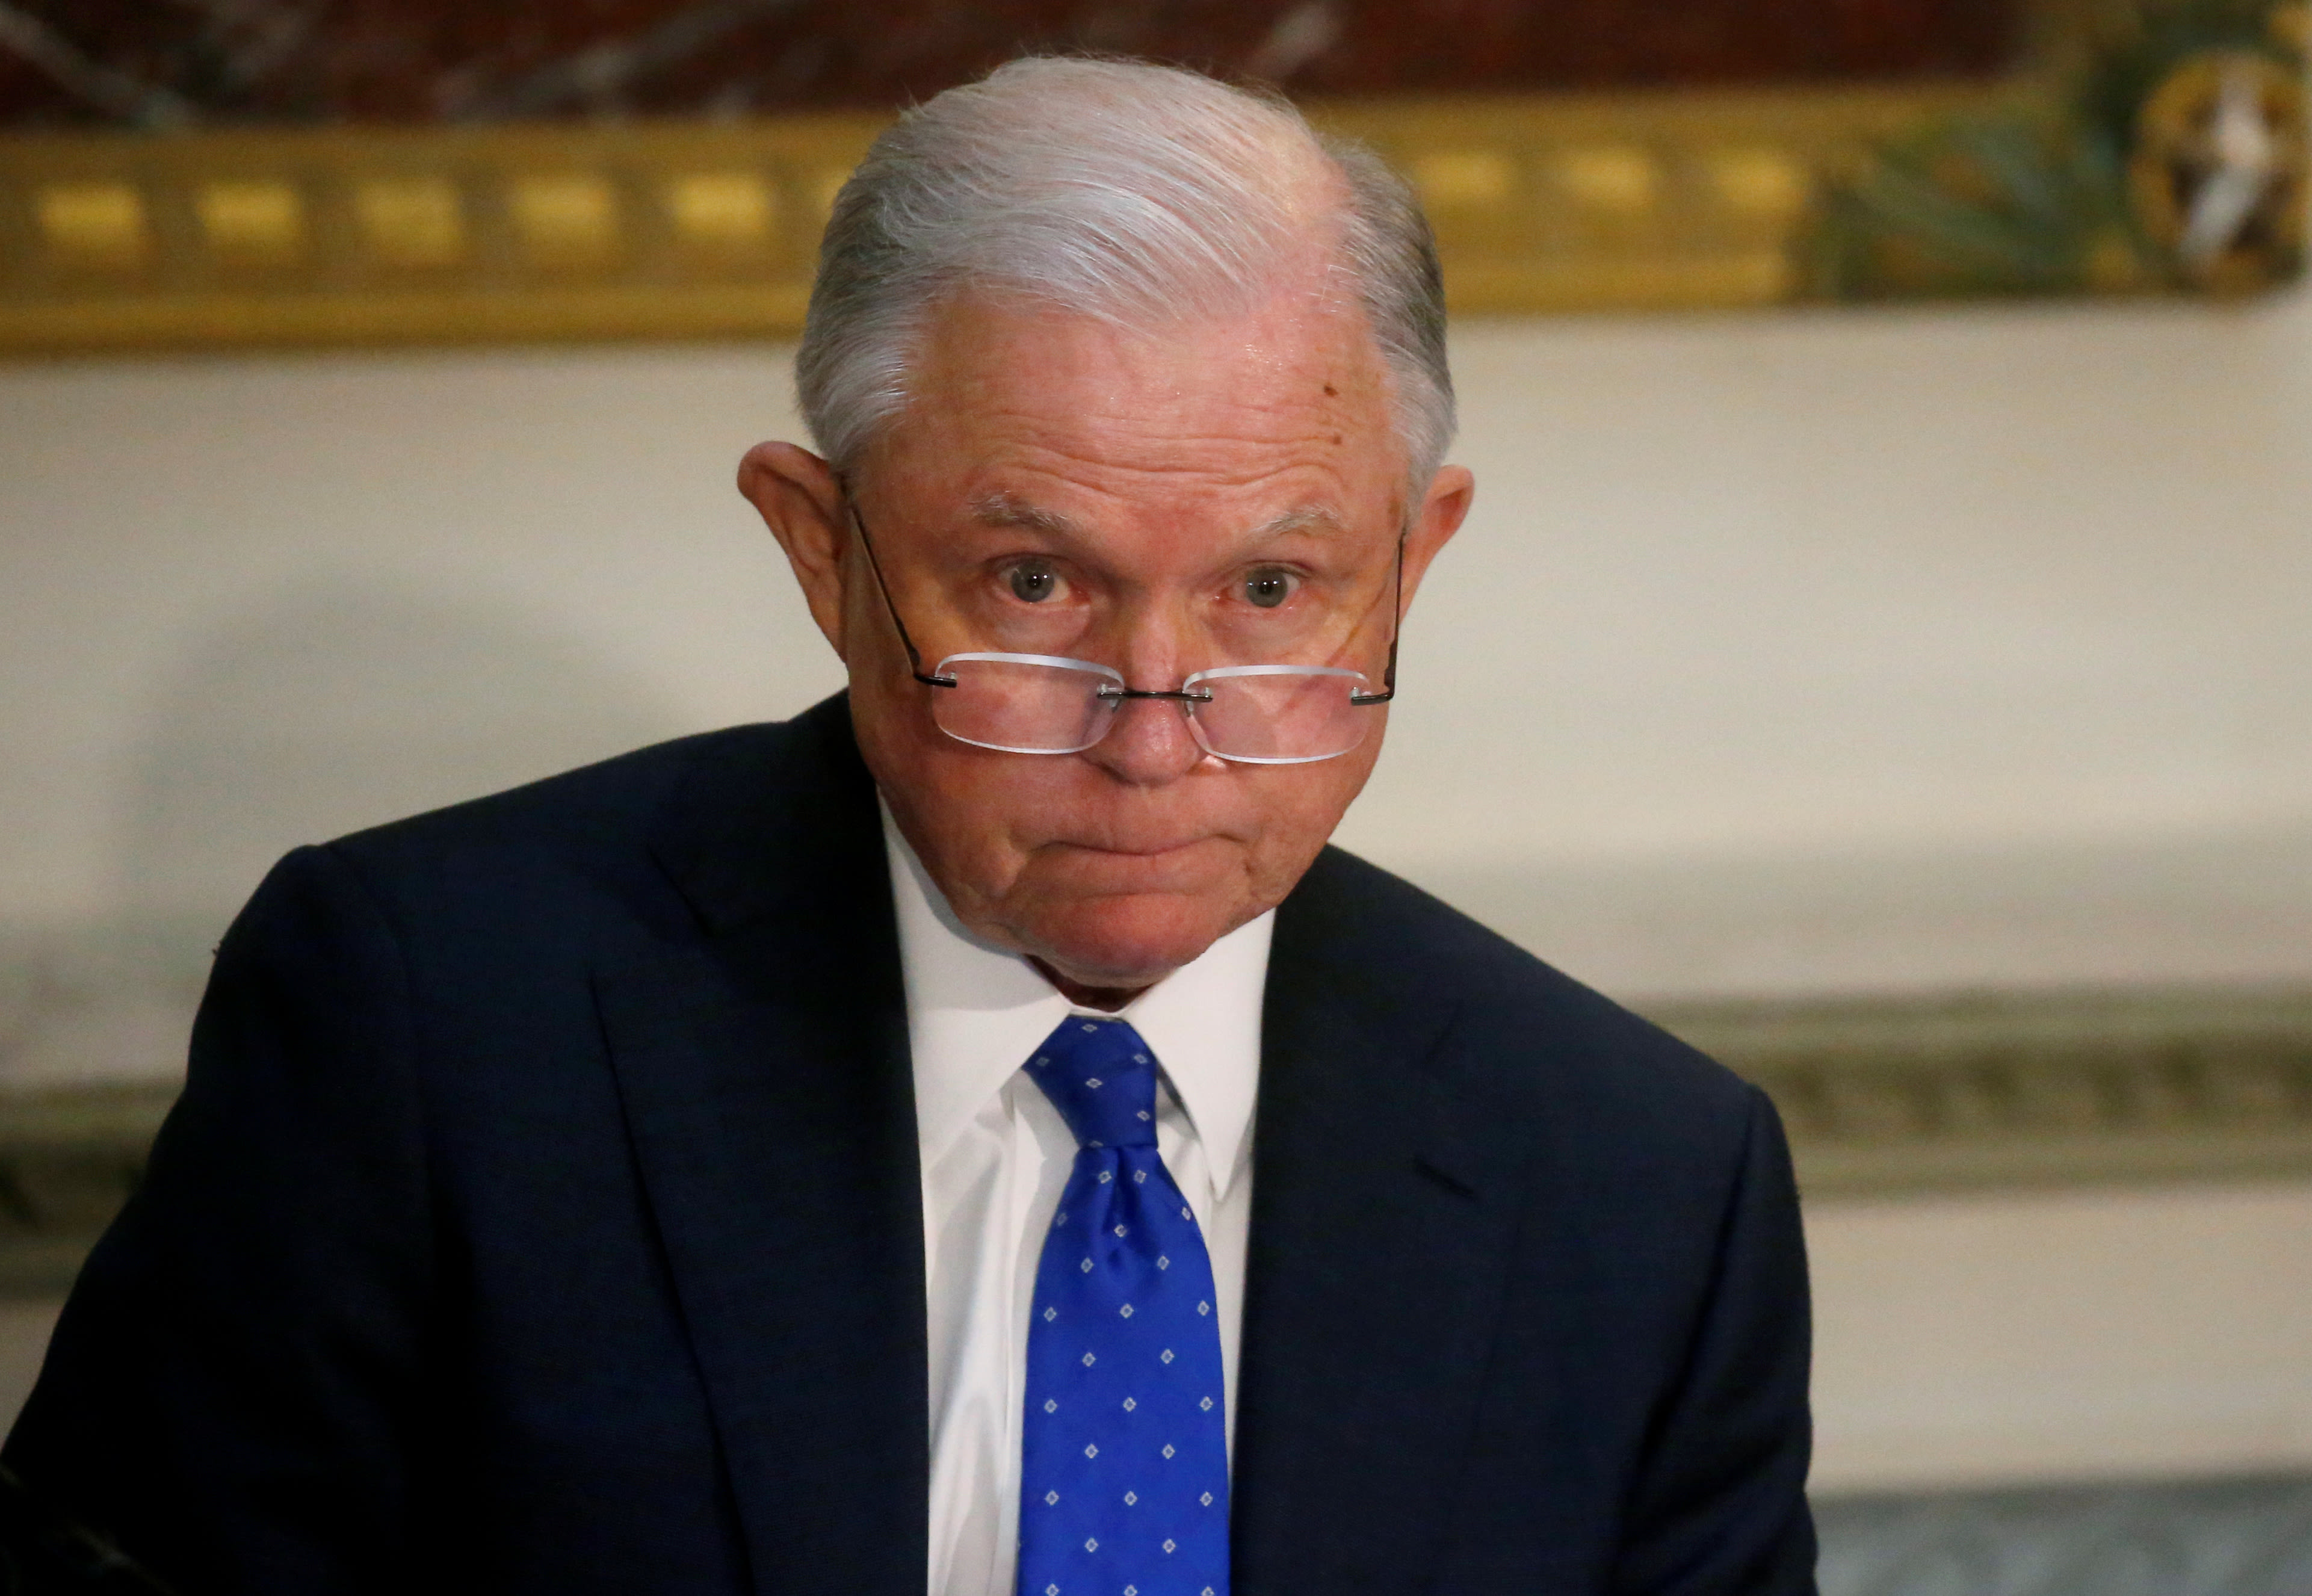 Report: Trump ‘can’t stand’ Jeff Sessions’ Southern accent